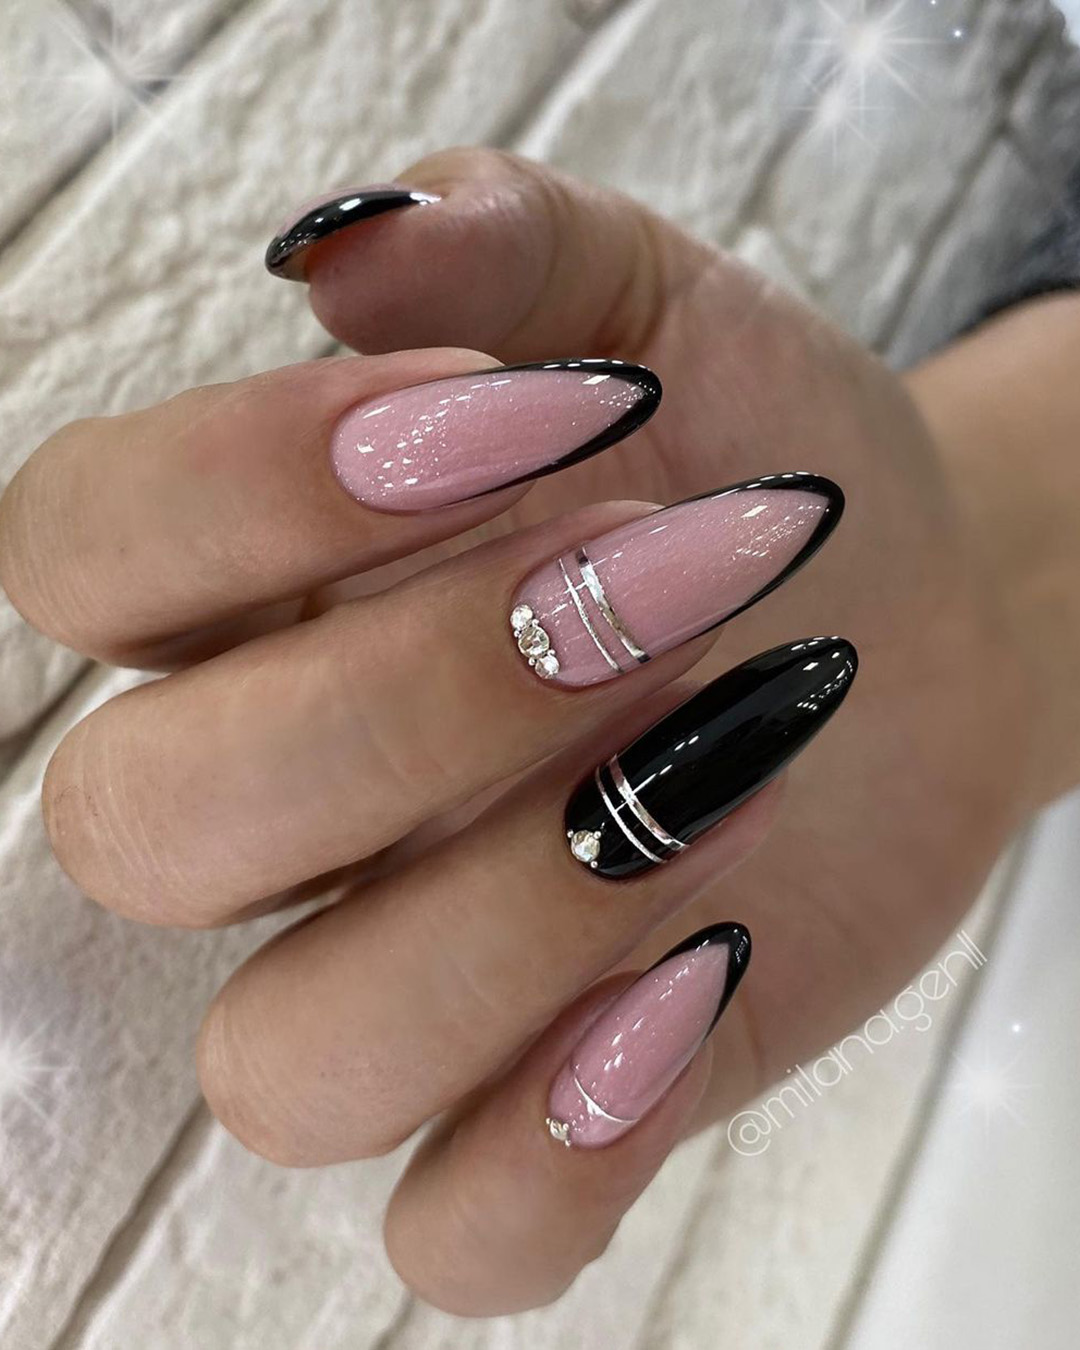 black wedding nails with pink french and silver rhinestones milana.gen11